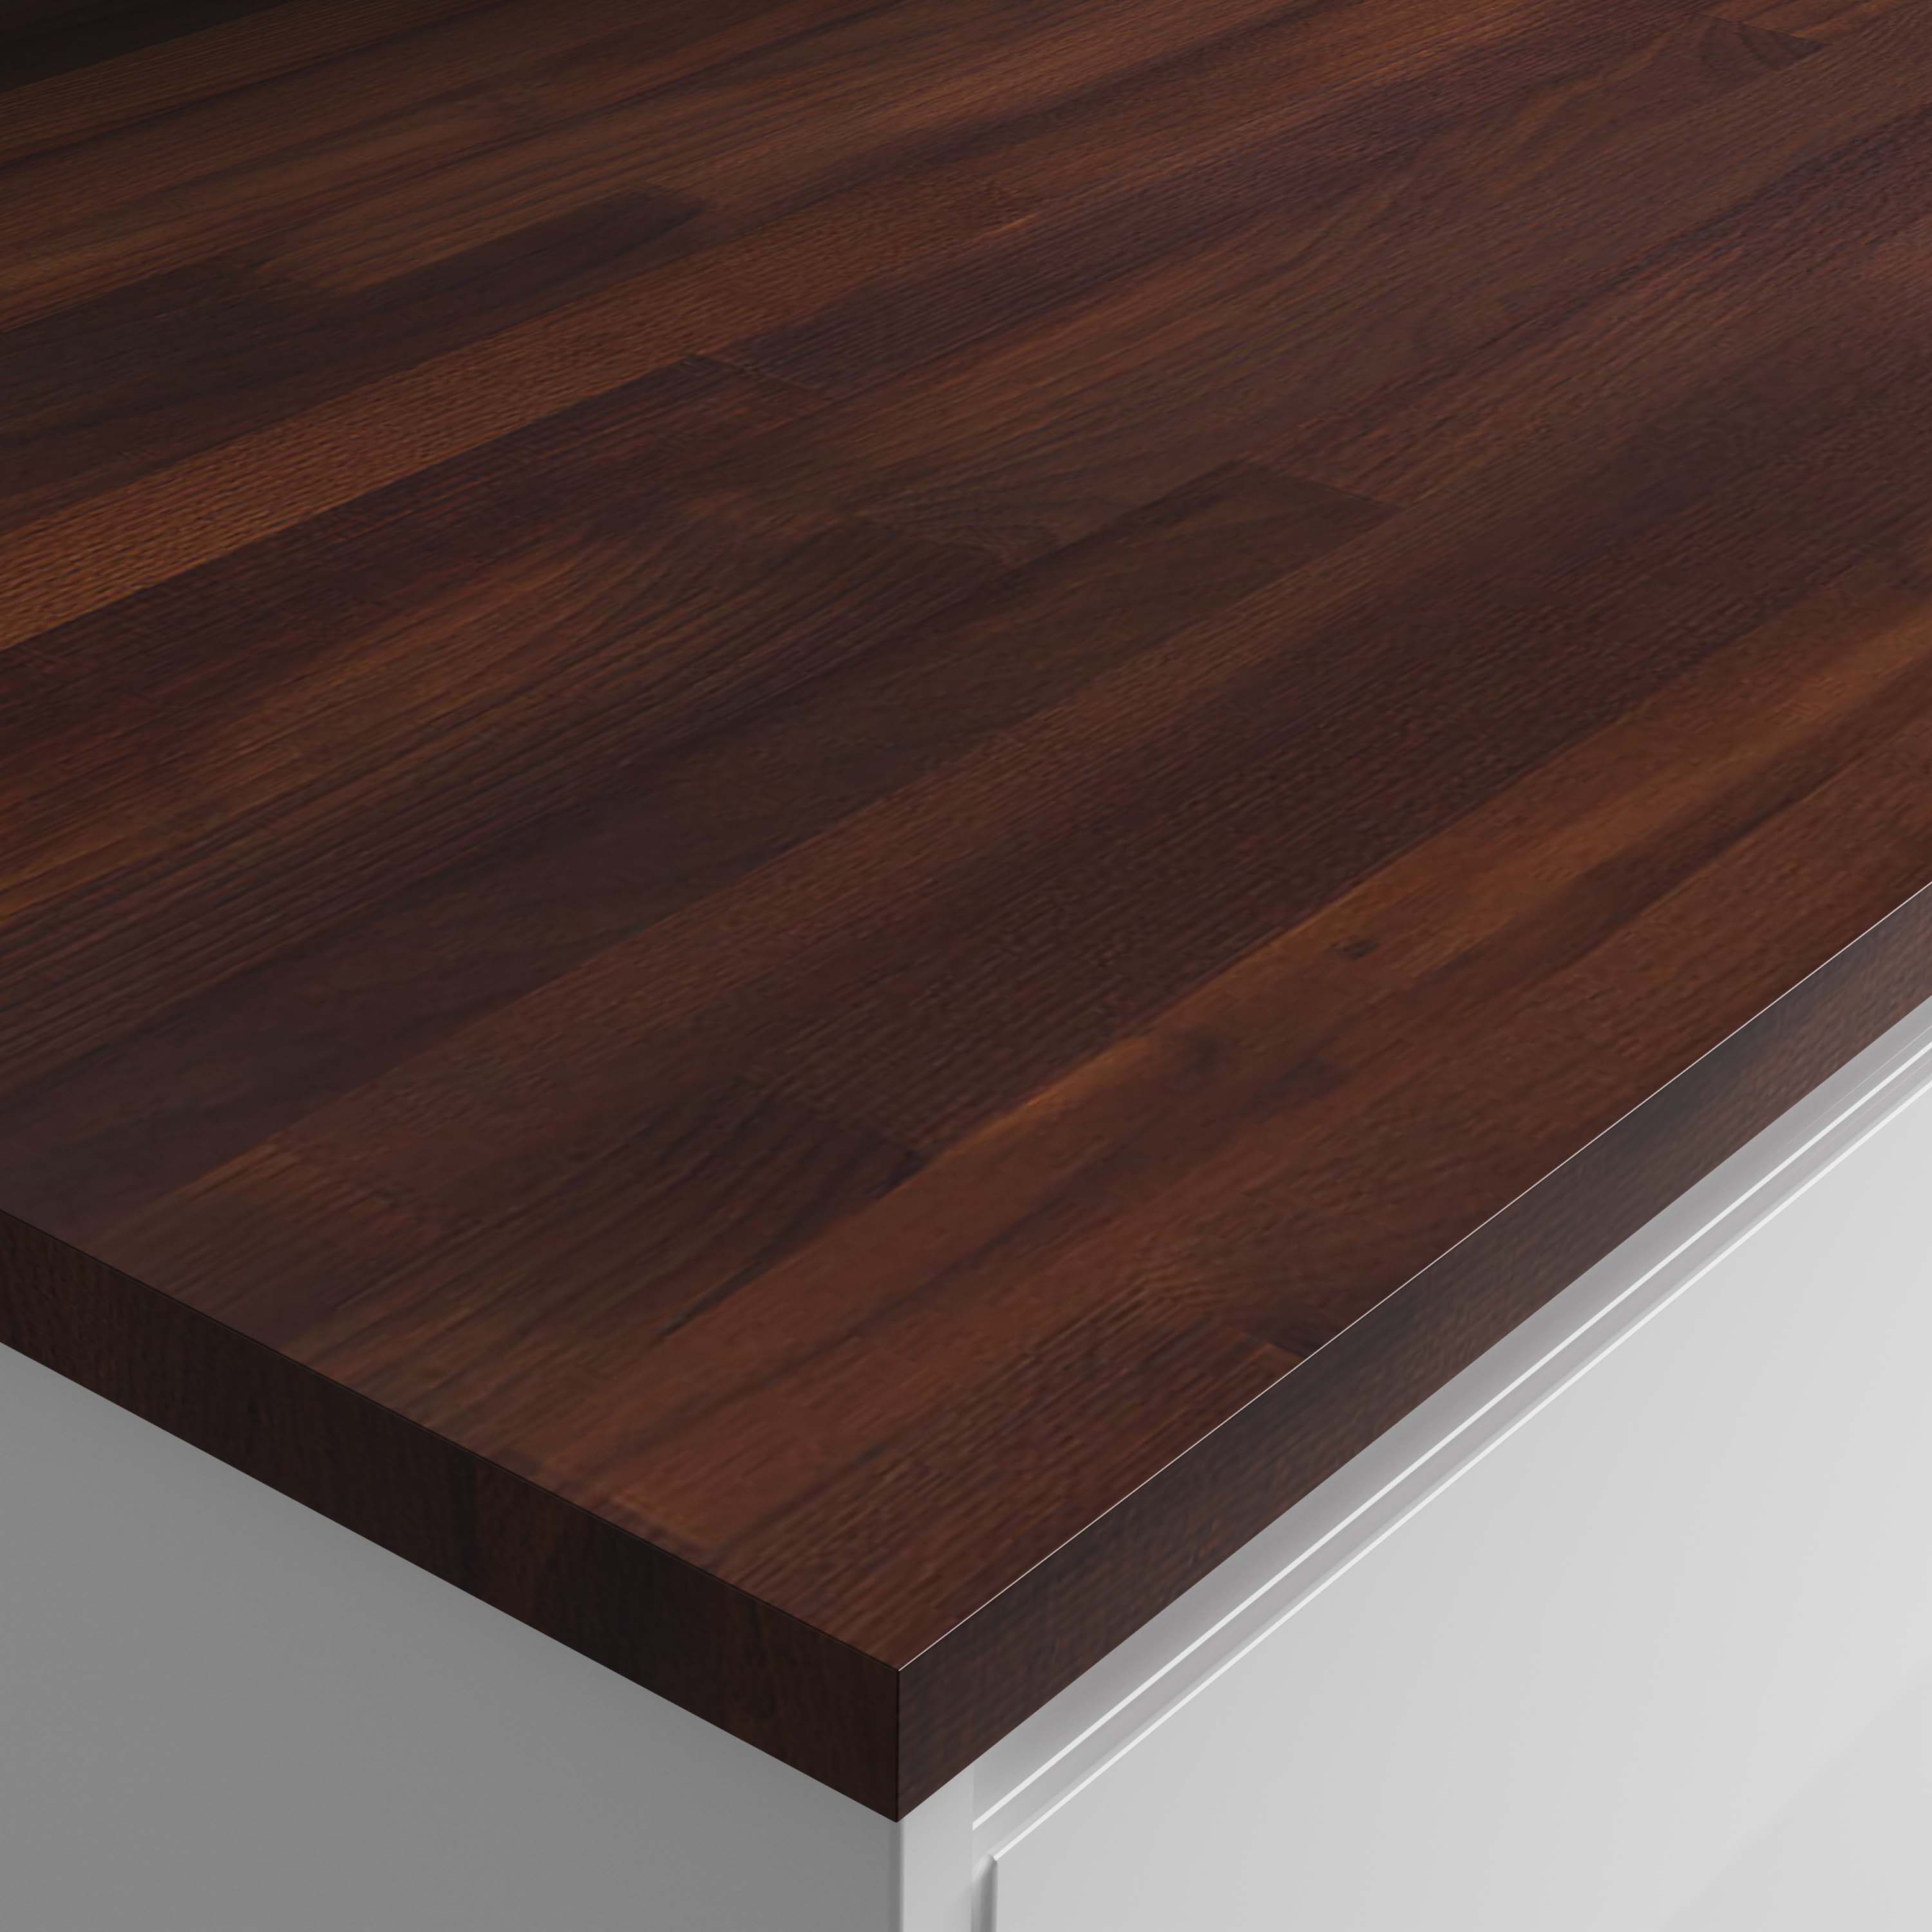 Image of Wickes Solid Wood Worktop - Thermo Beech 600 x 38mm x 3m